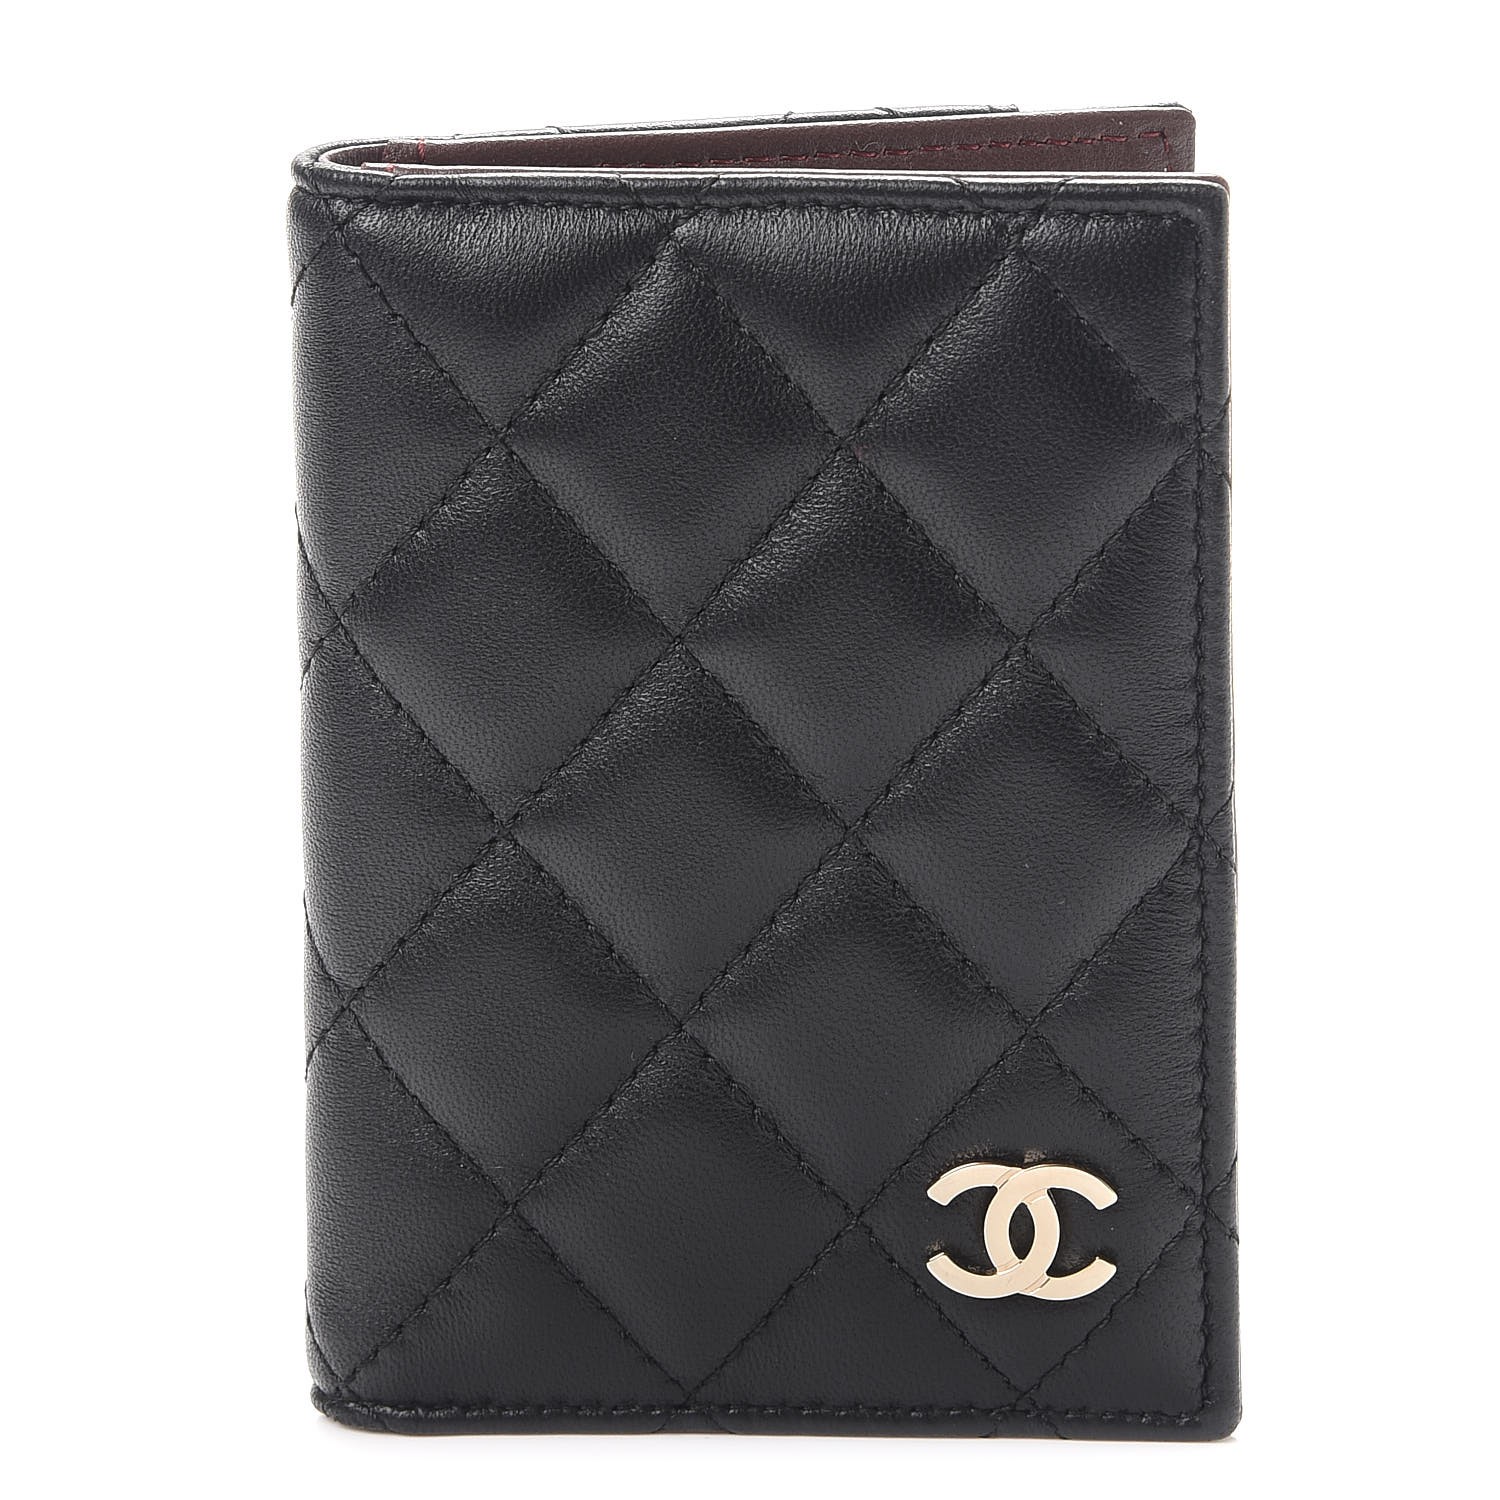 CHANEL Lambskin Quilted Card Holder Wallet Black 267461